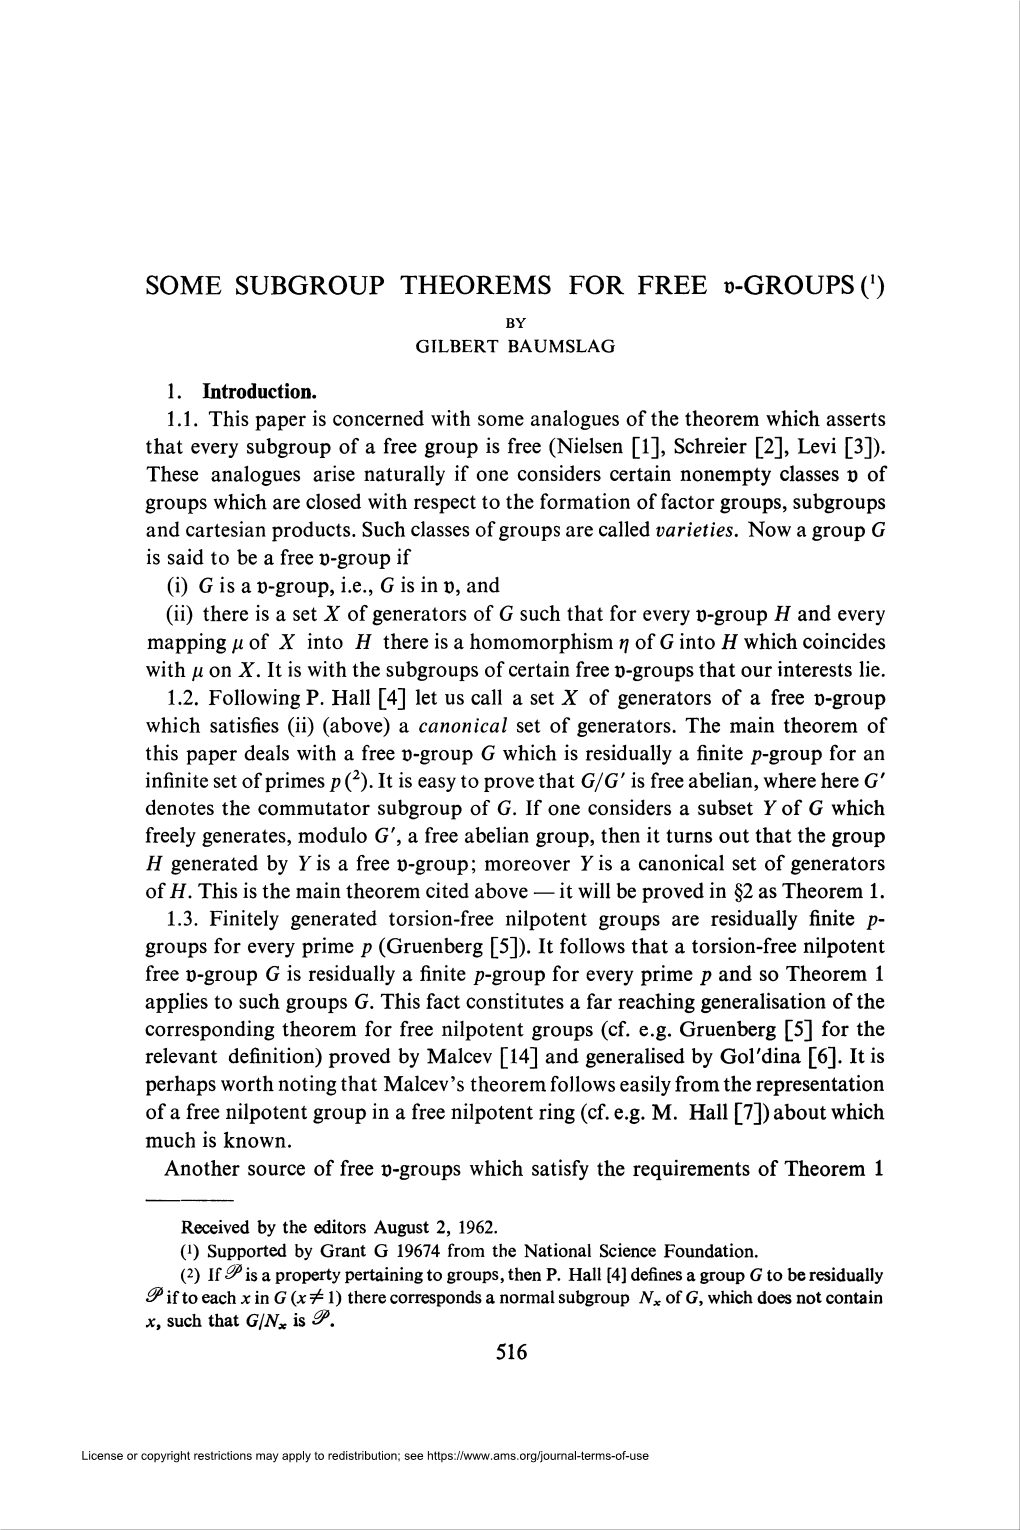 SOME SUBGROUP THEOREMS for FREE N-GROUPS (*)